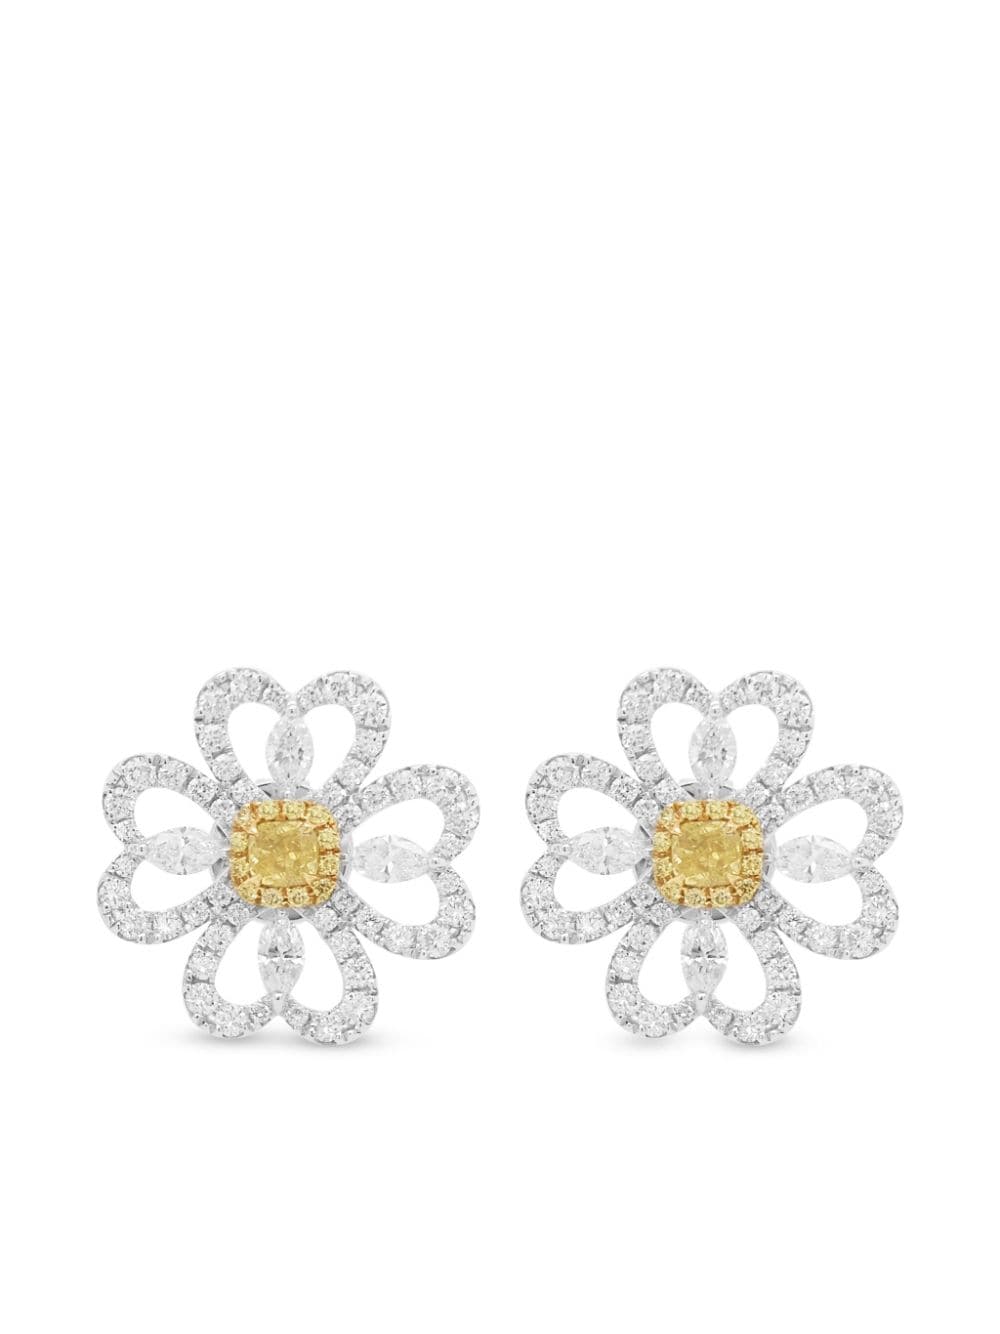 HYT Jewelry 18kt white and yellow gold stud earrings - Silver von HYT Jewelry